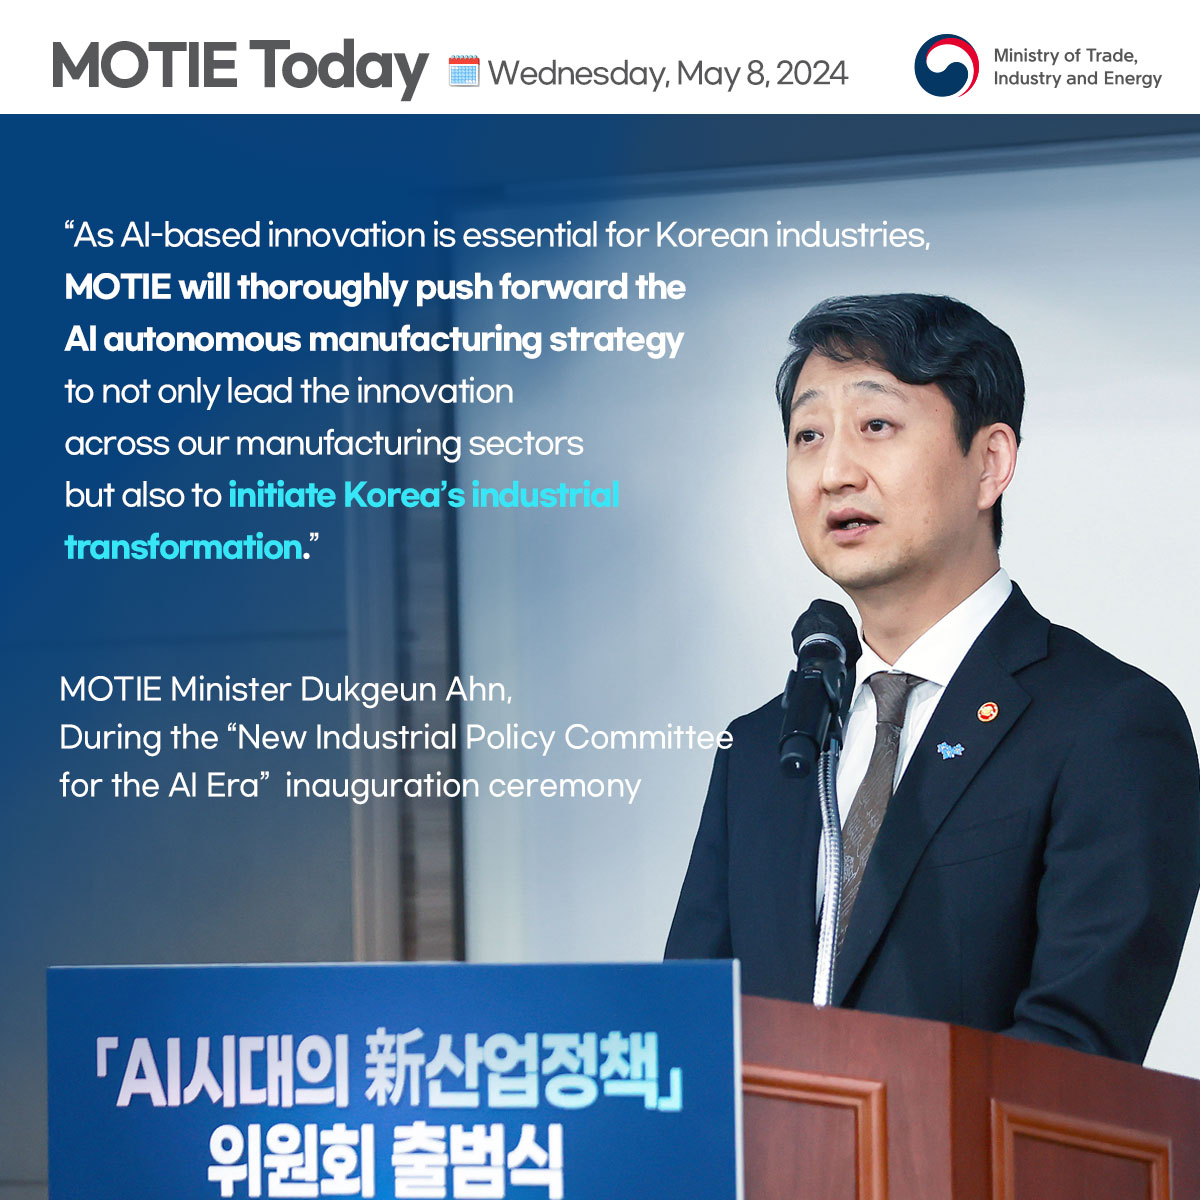 MOTIE launches AI Industrial Policy Committee, laying out roadmap for AI era